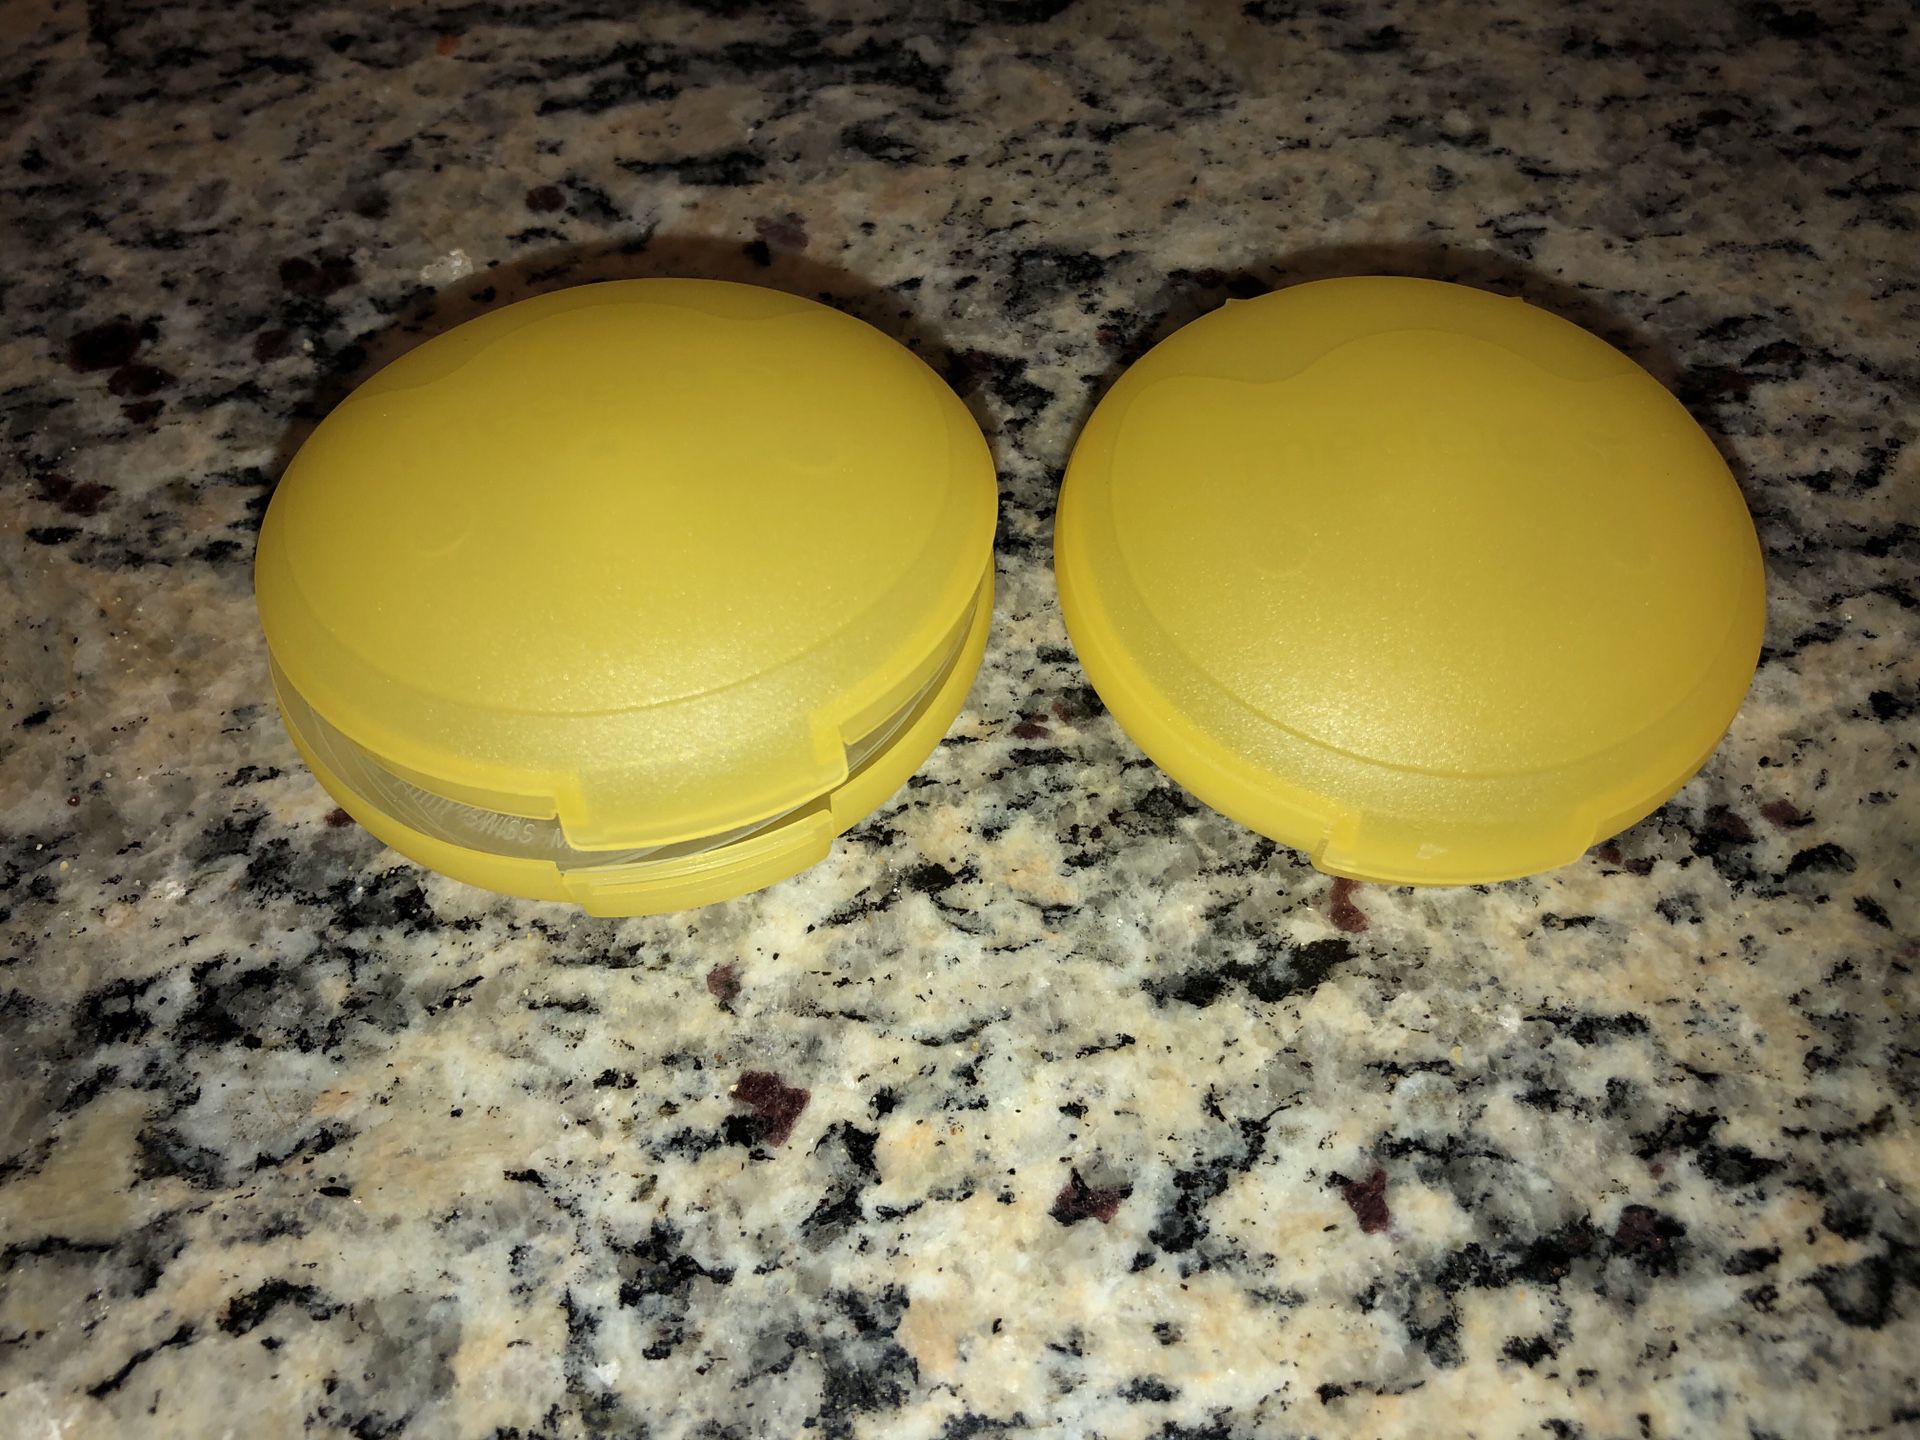 Seven nipple shields and two carrying cases